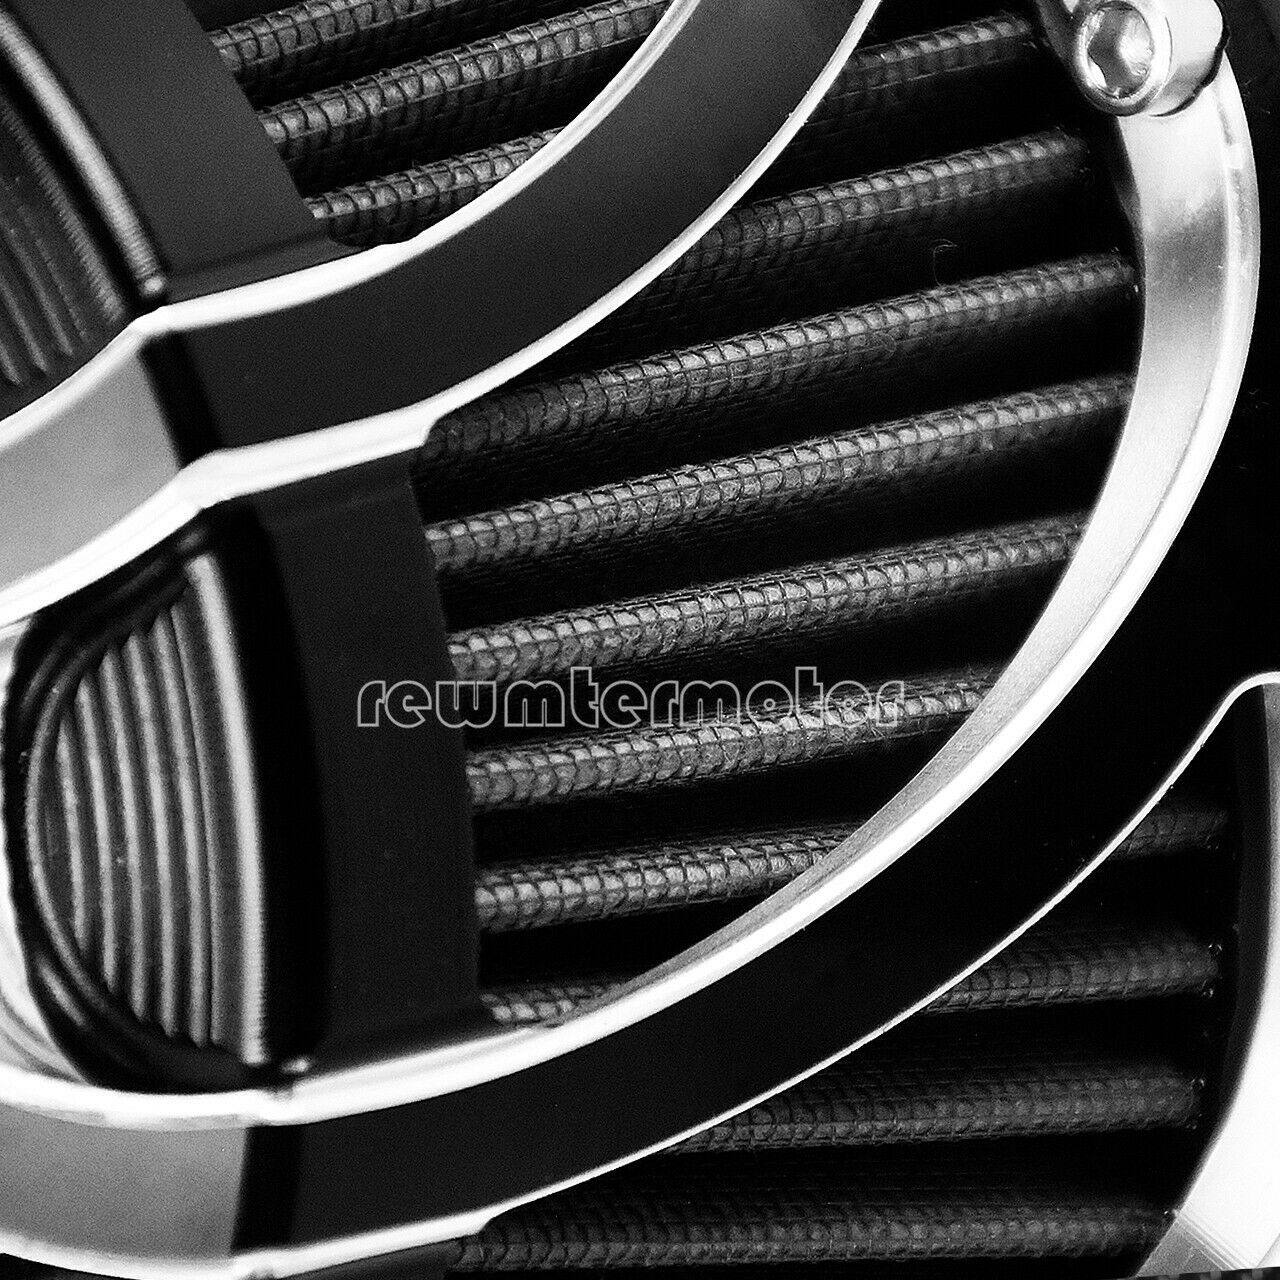 Spiral Cut Air Cleaner Intake Filter Fit For Harley M8 Touring Trike 2017-2020 - Moto Life Products